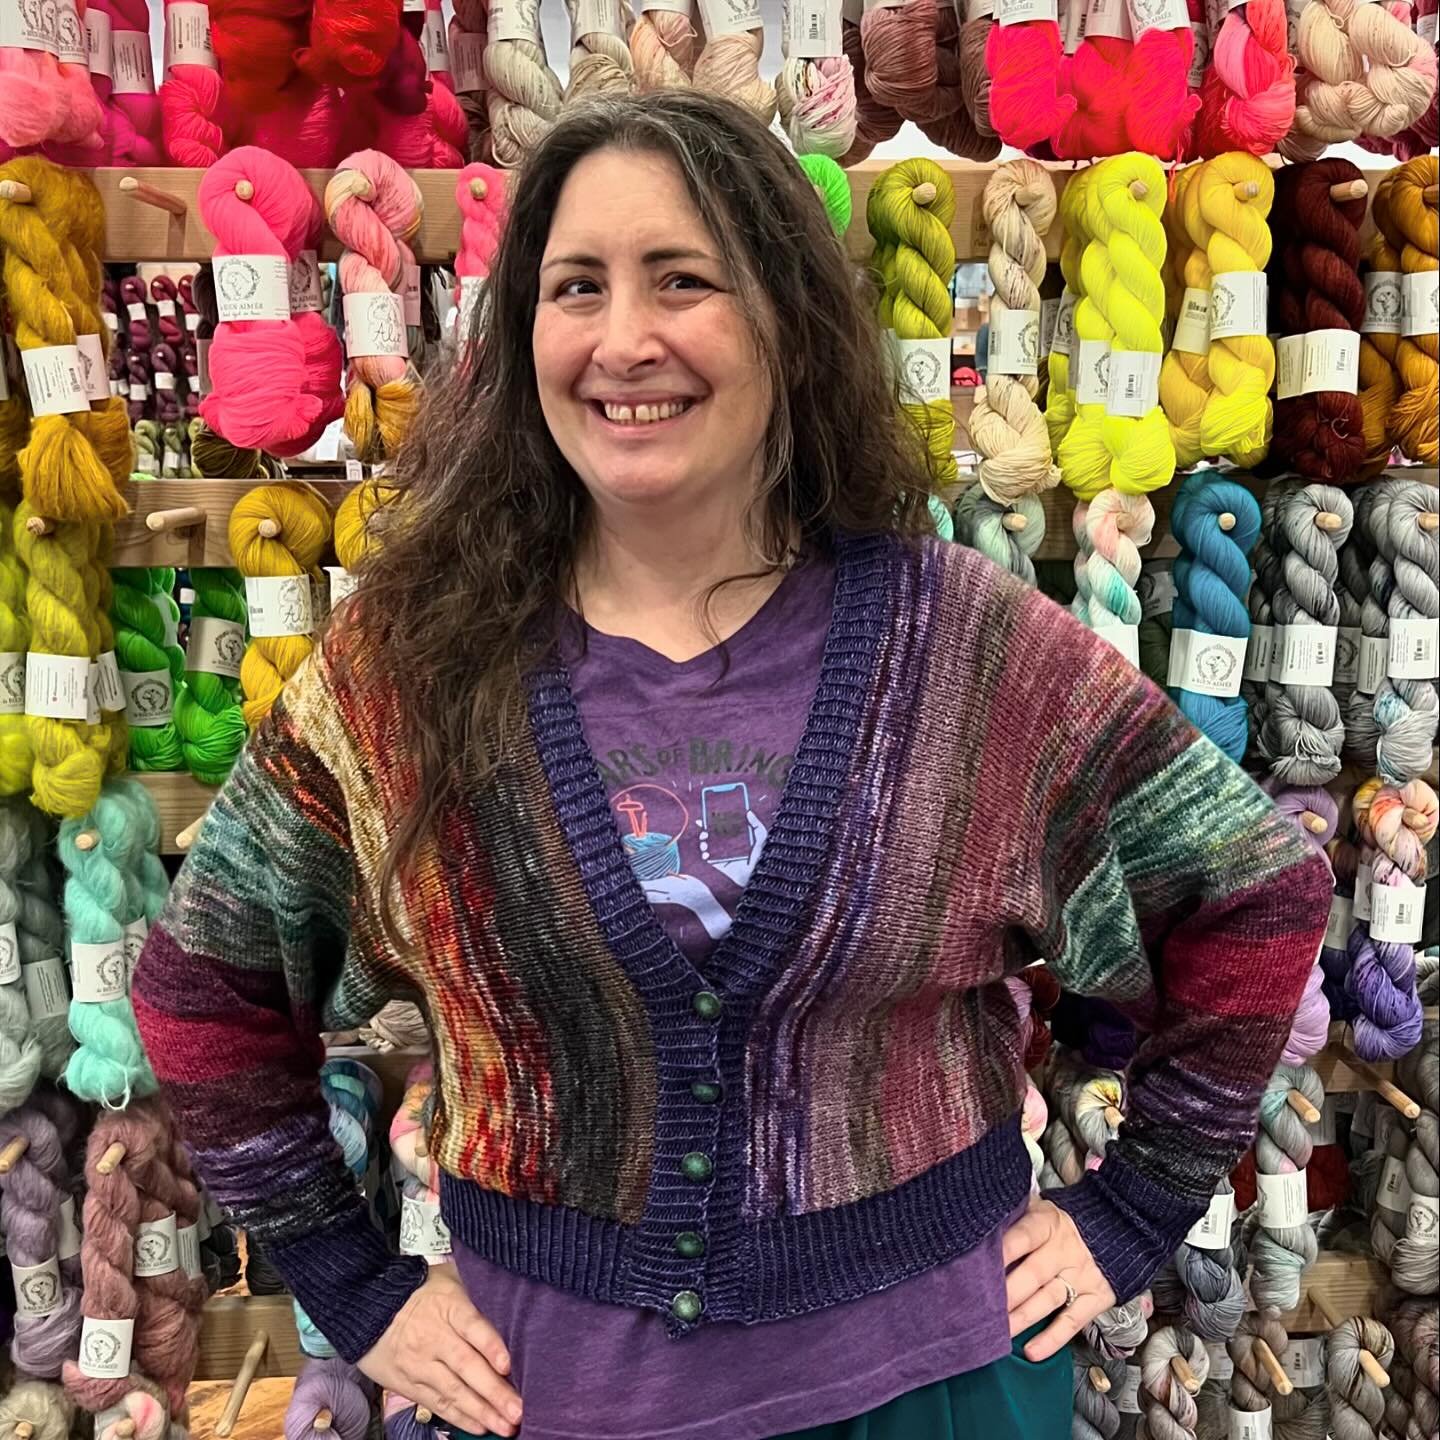 Lesley was in the shop to take Jill&rsquo;s Embroidery Basics class, and we stopped in our tracks when we saw her gorgeous cardigan! It is the Radvent Cardigan by @ambahobrien &hellip; and this clever design shows off a 25 mini skein advent collectio